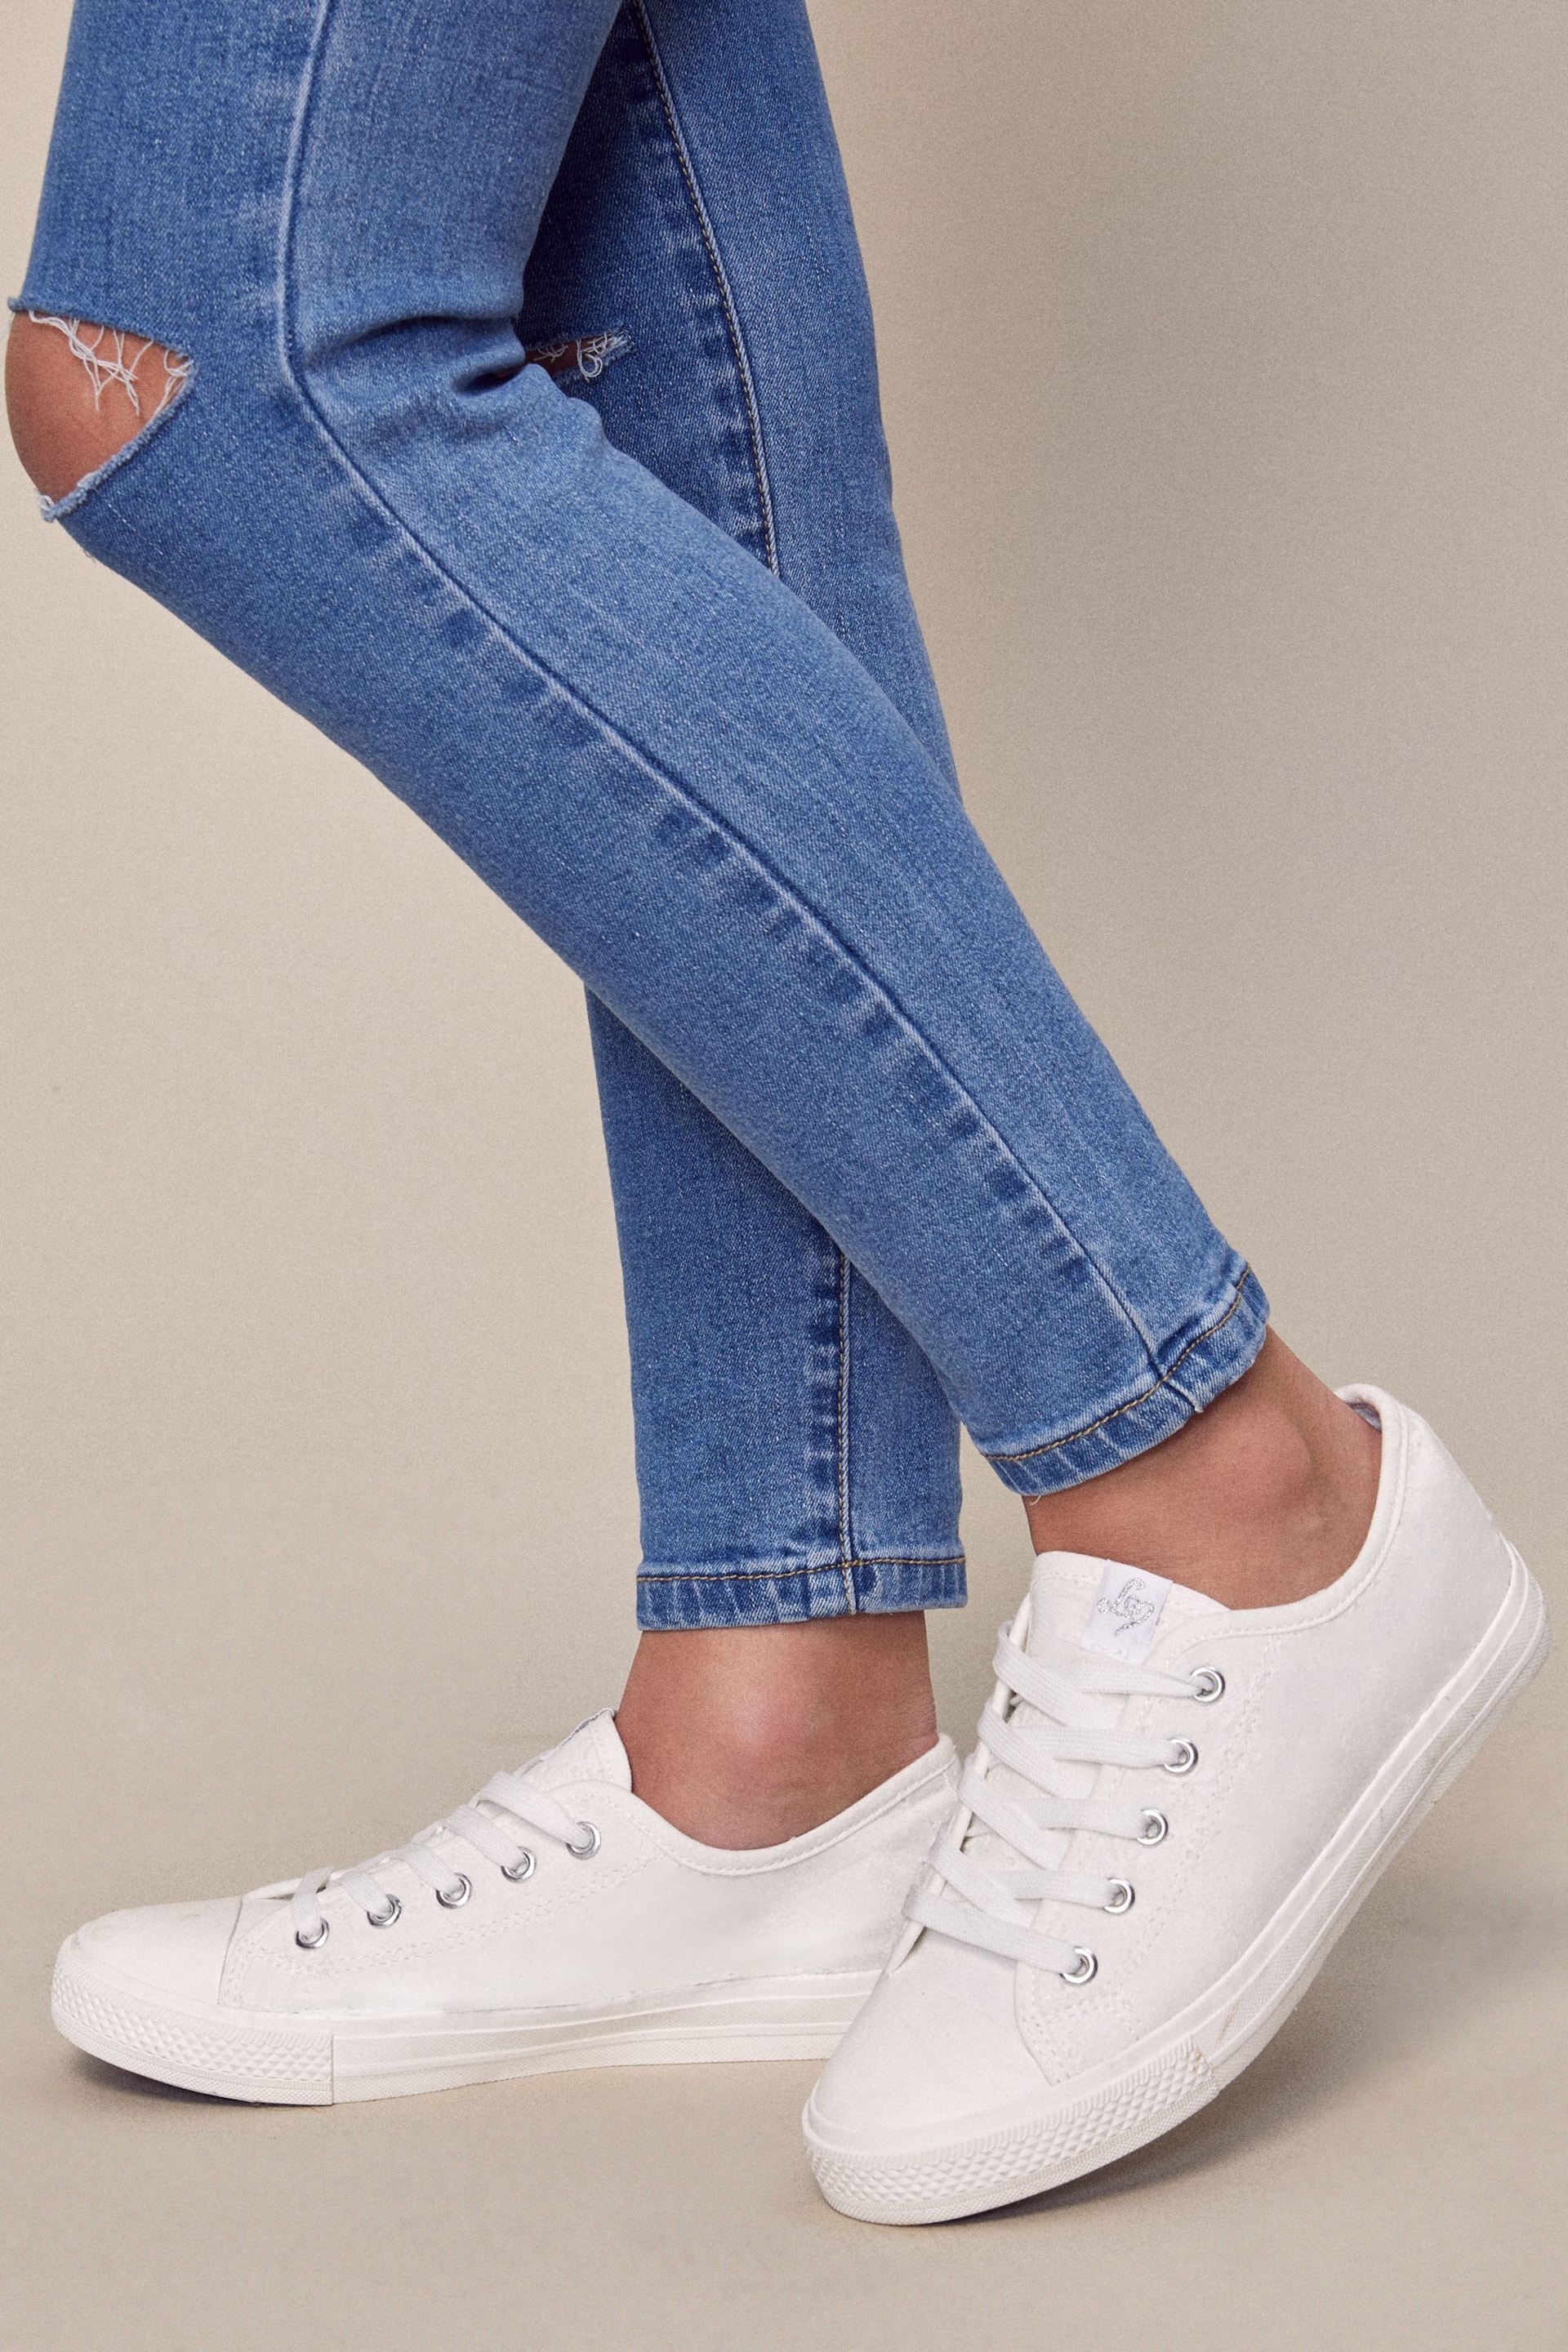 Lipsy White Flat Lace Up Trainer - Image 1 of 4